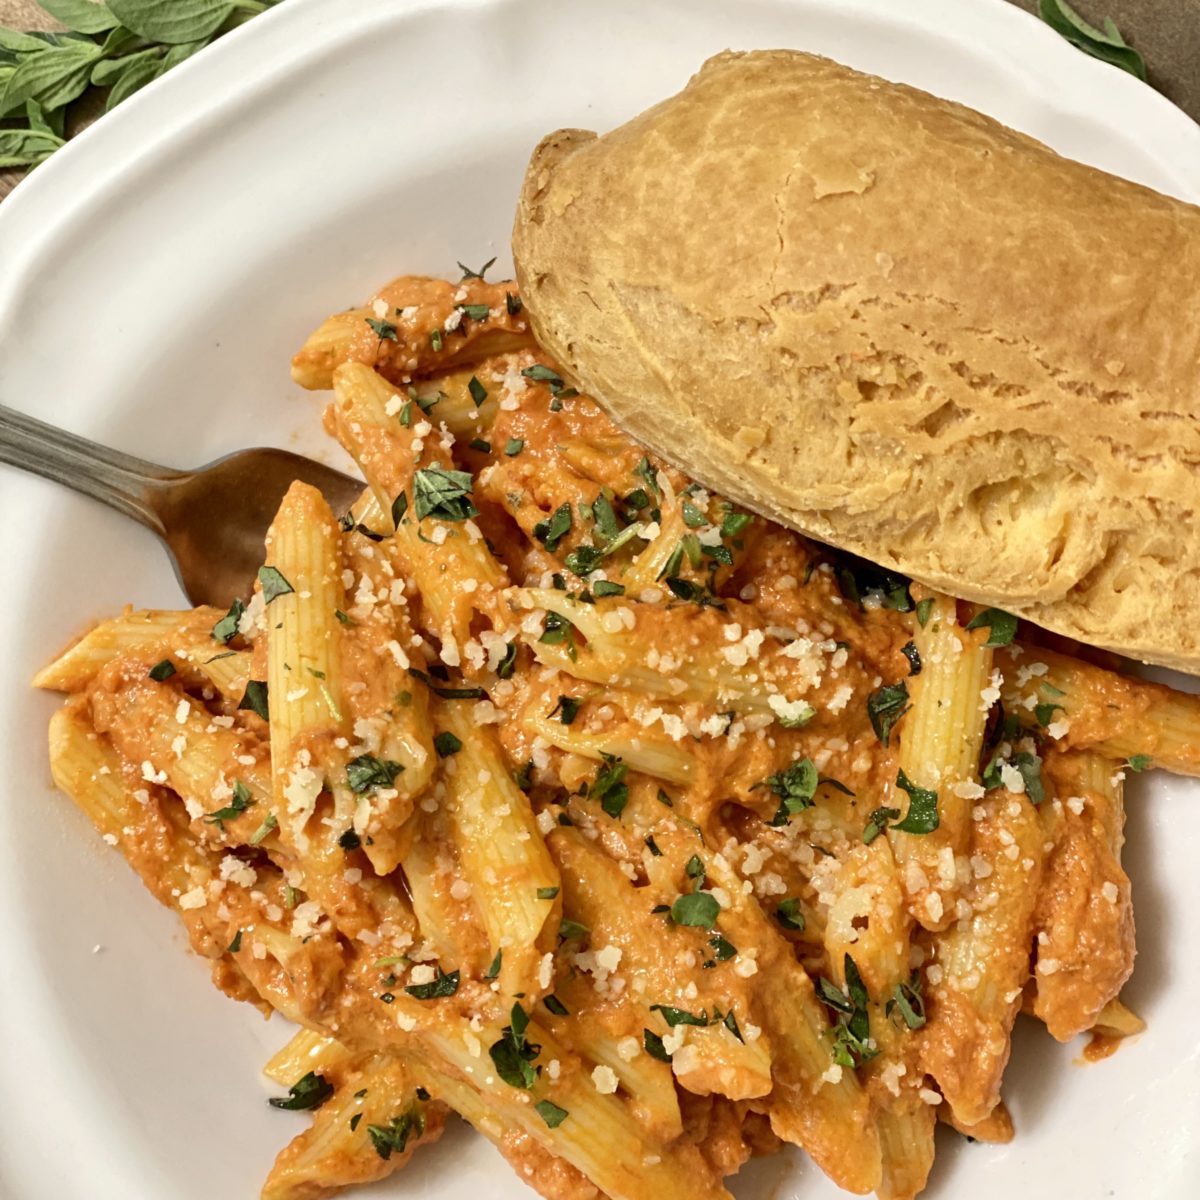 Vodka penne in a white bowl garnished with chopped fresh oregano and Parmesan cheese. A baguette is on the side.